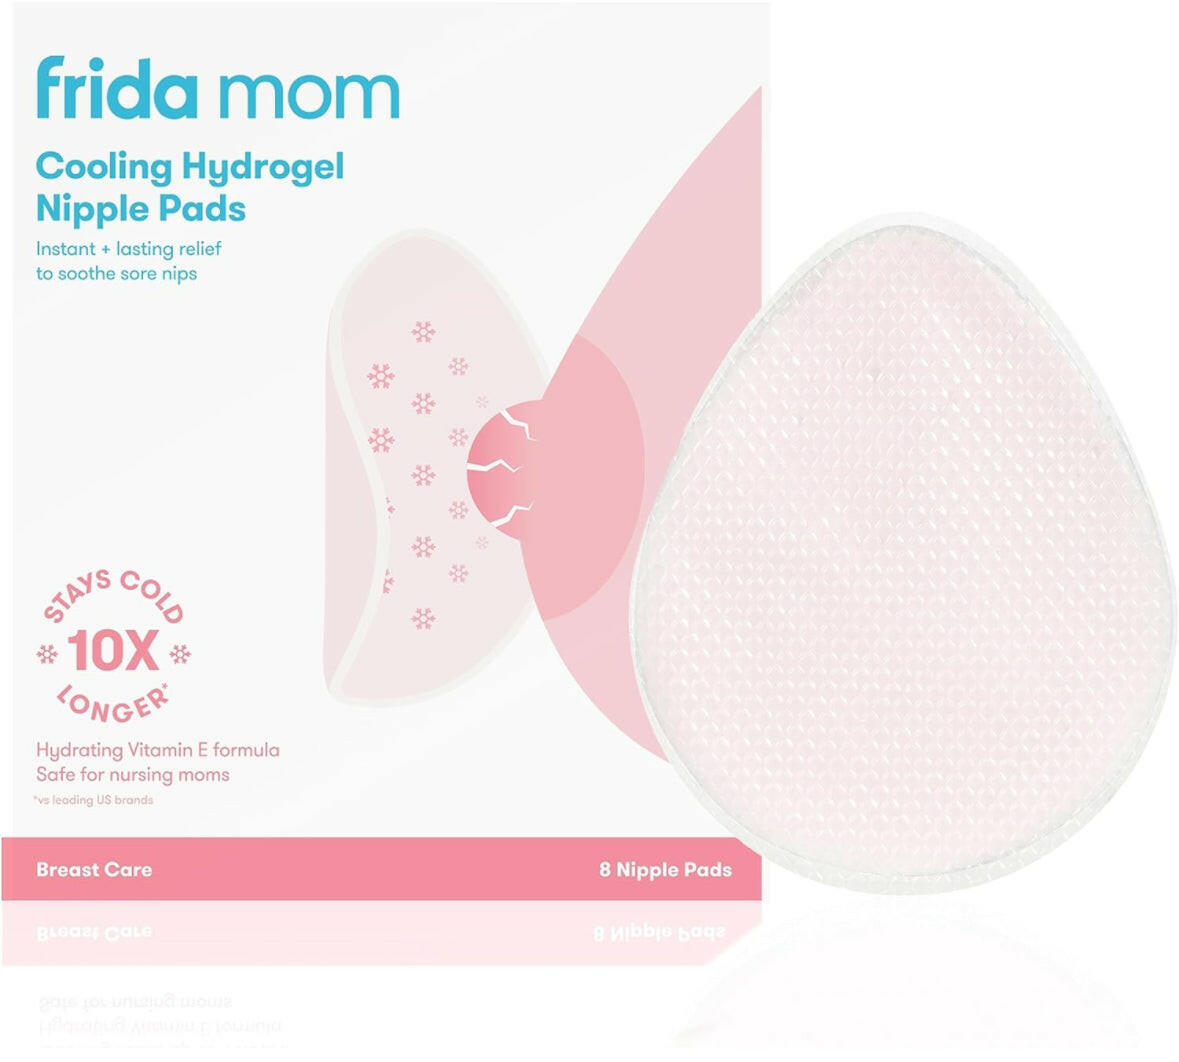 Frida Mom Cooling Hydrogel Nipple Pads - Soothing Nursing Pads, Made for Sore Nipples, Breastfeeding Essentials for Mom, 8 Count.